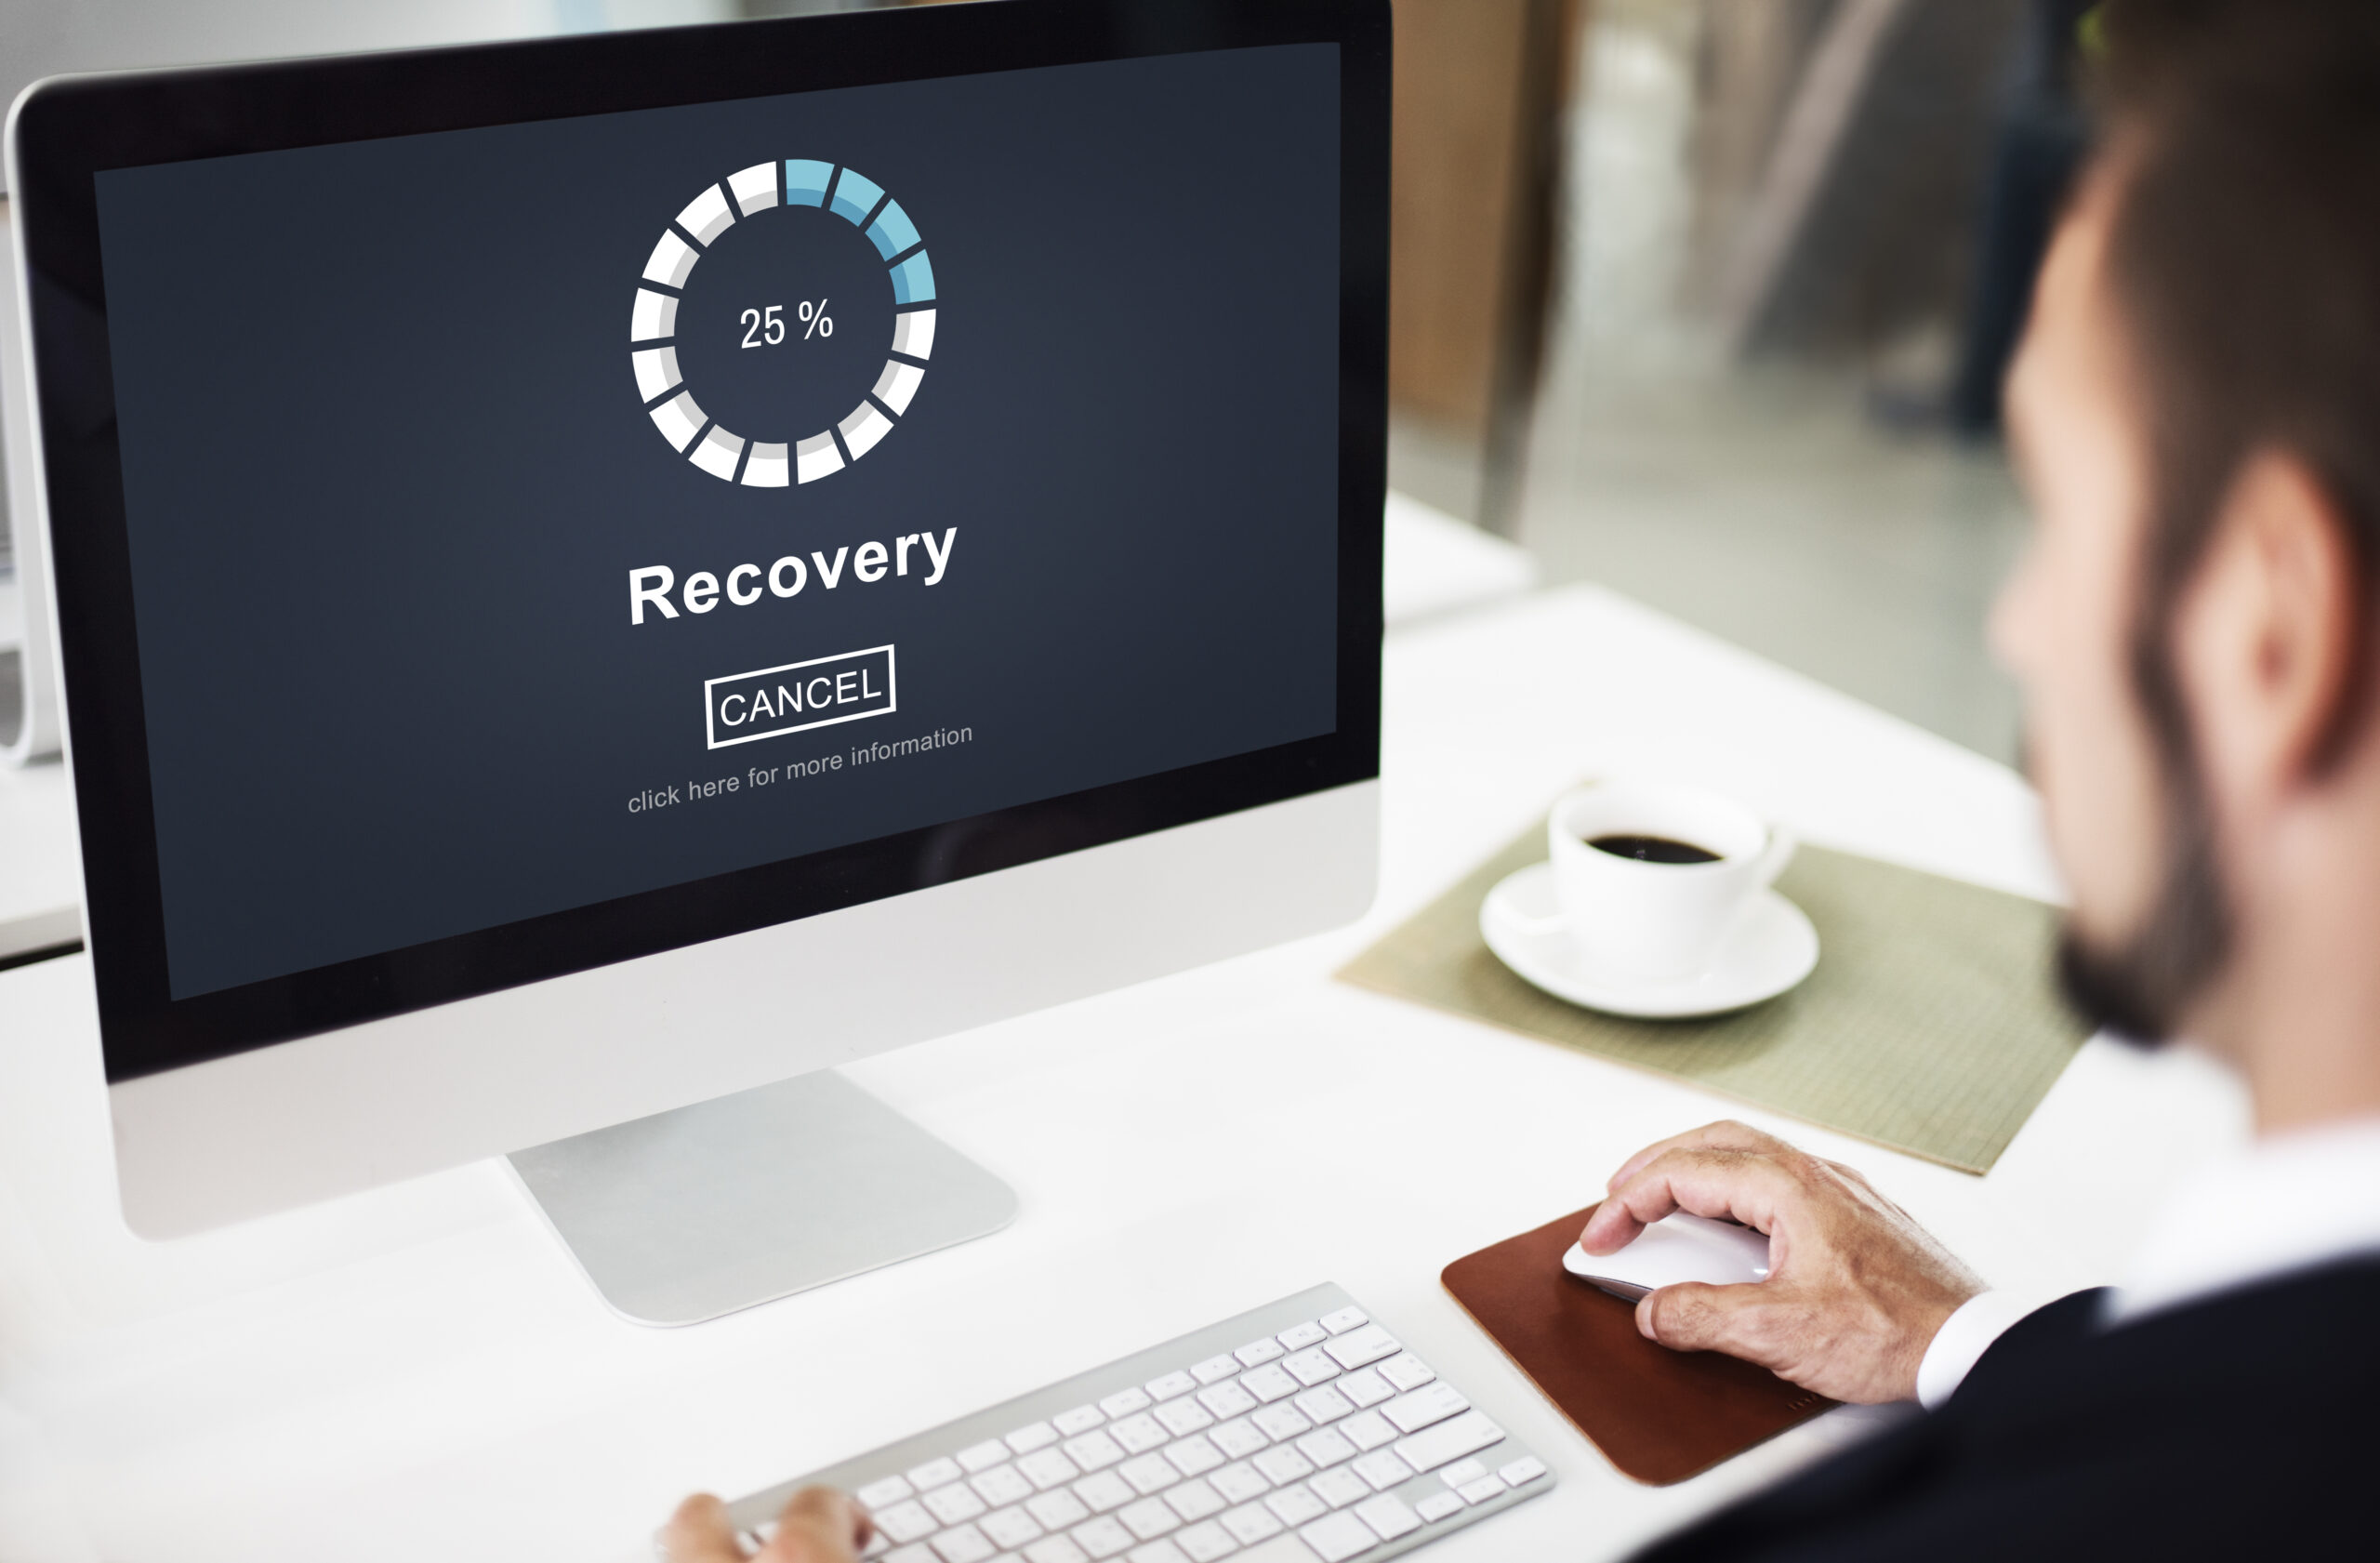 Two crucial strategies that help organisations weather these storms are business continuity and disaster recovery but what are the differences between business continuity and disaster recovery?